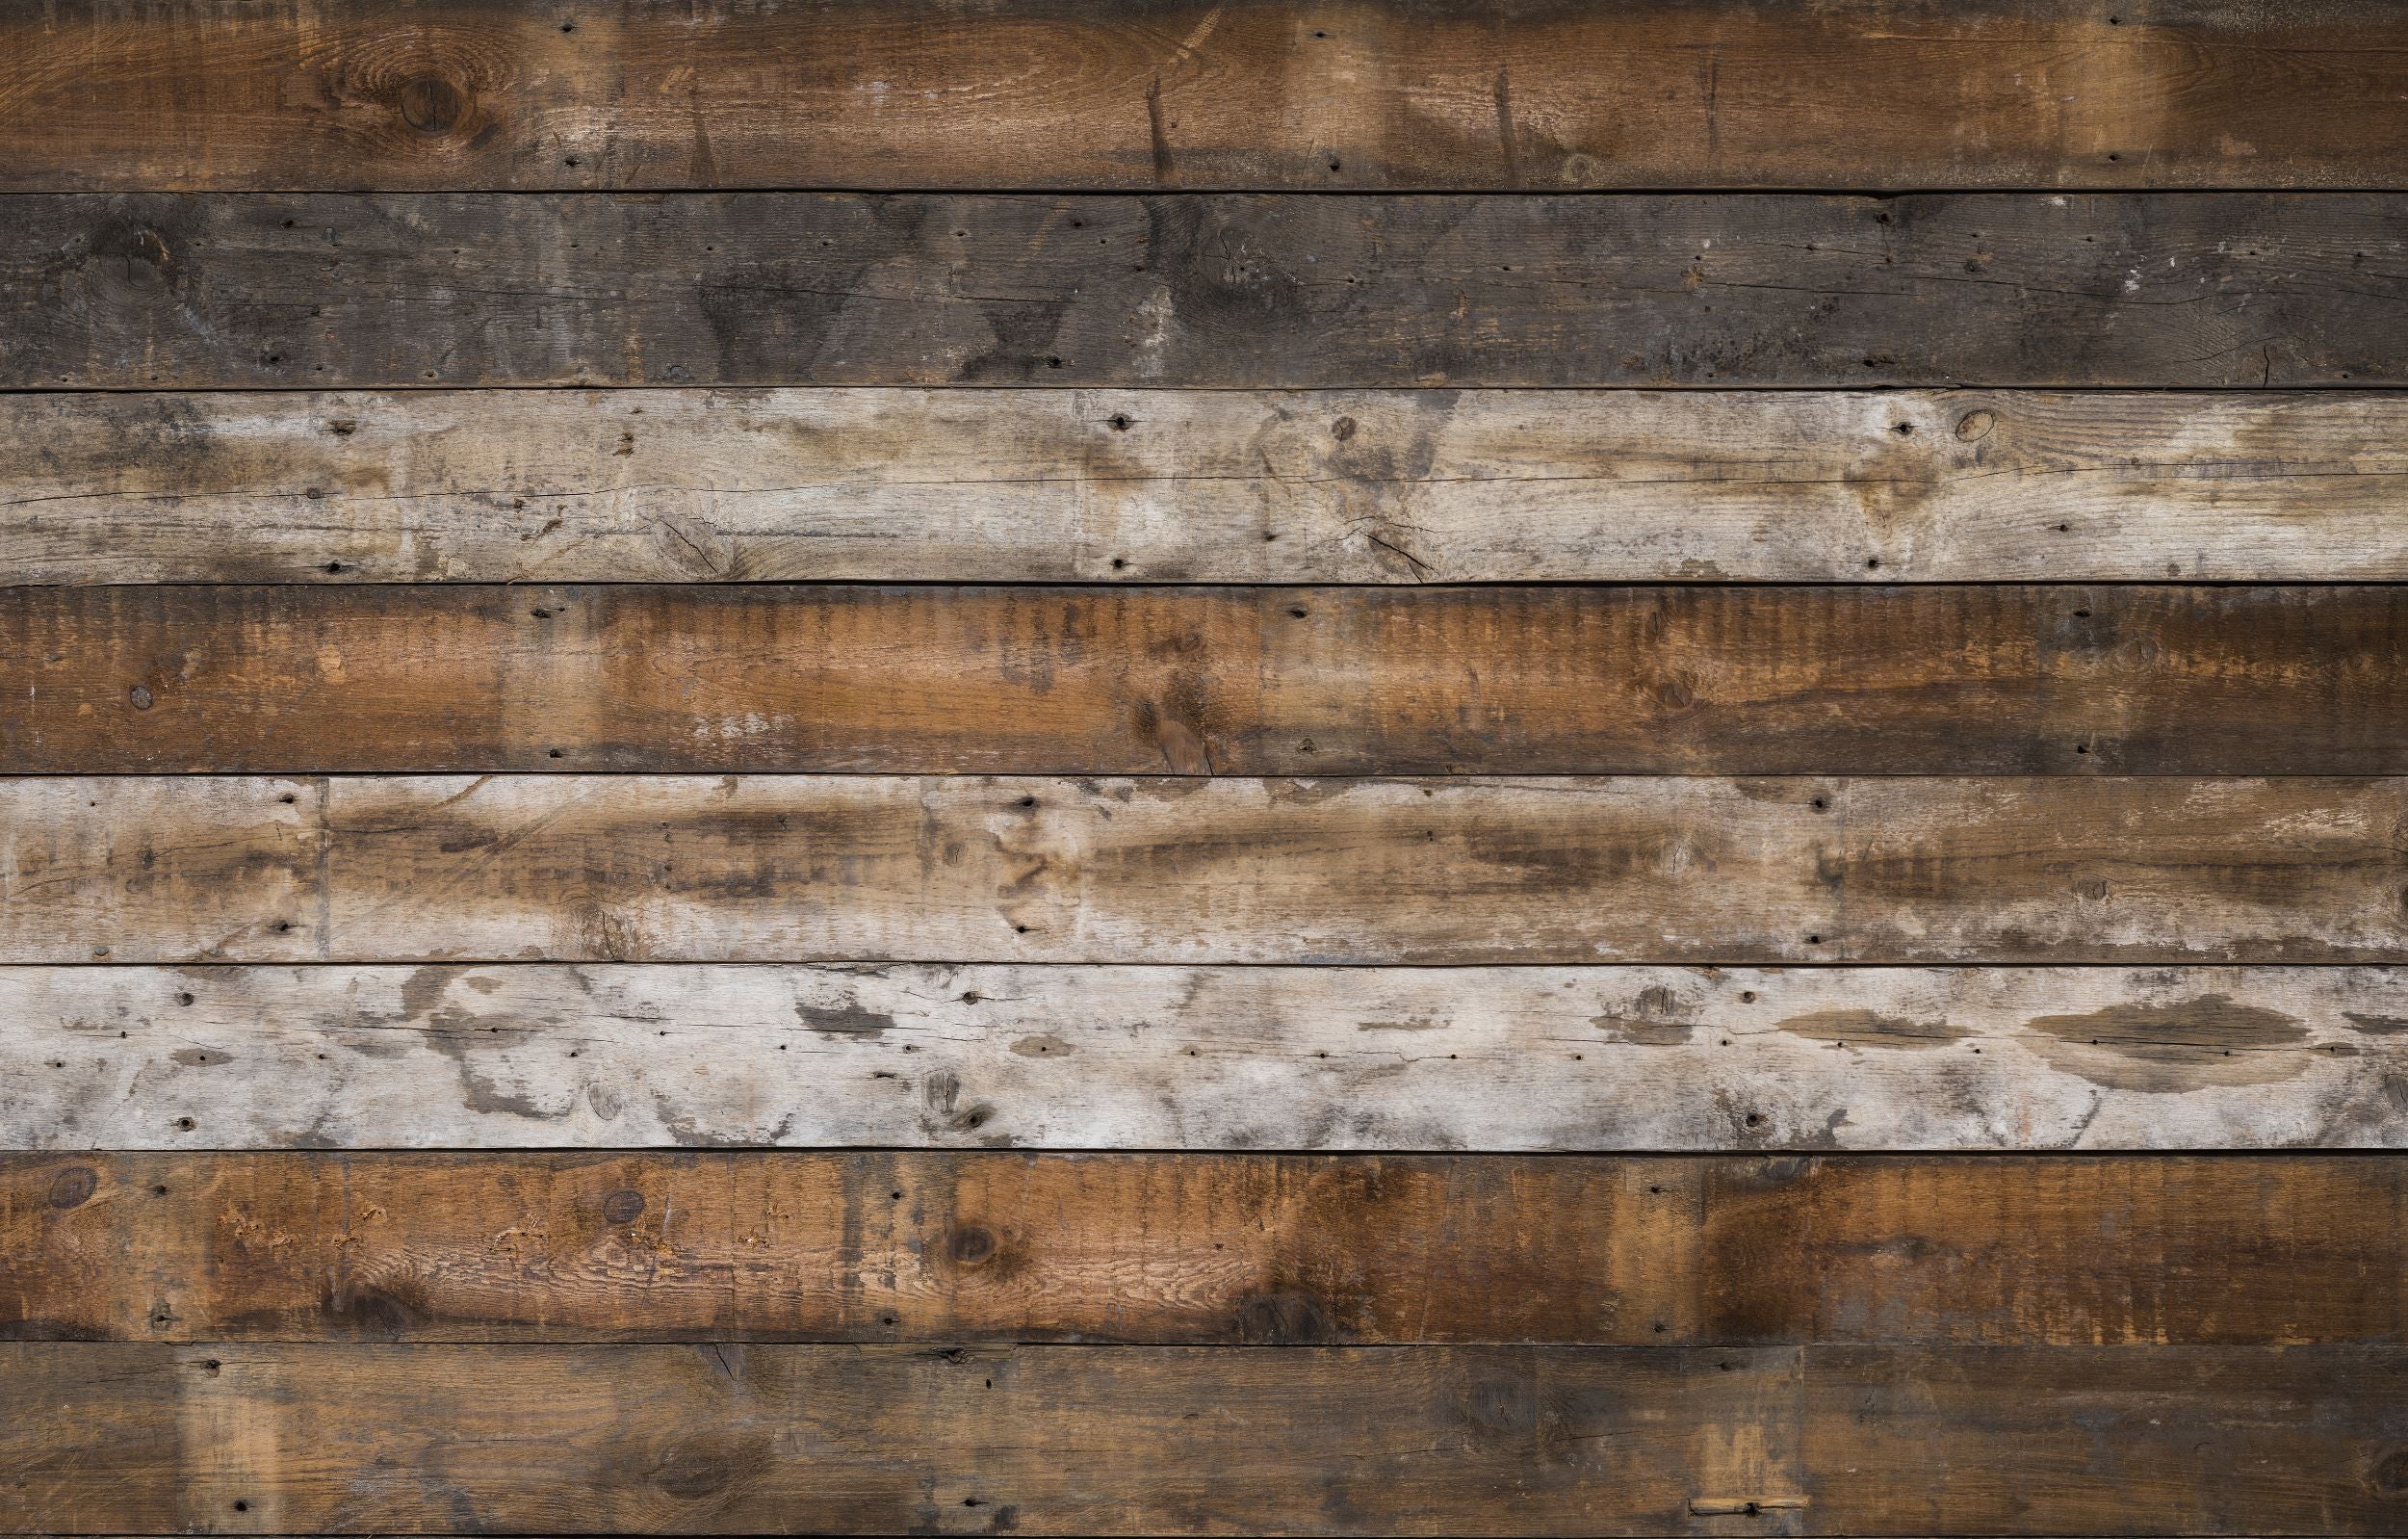 Reclaimed wooden wall decor.